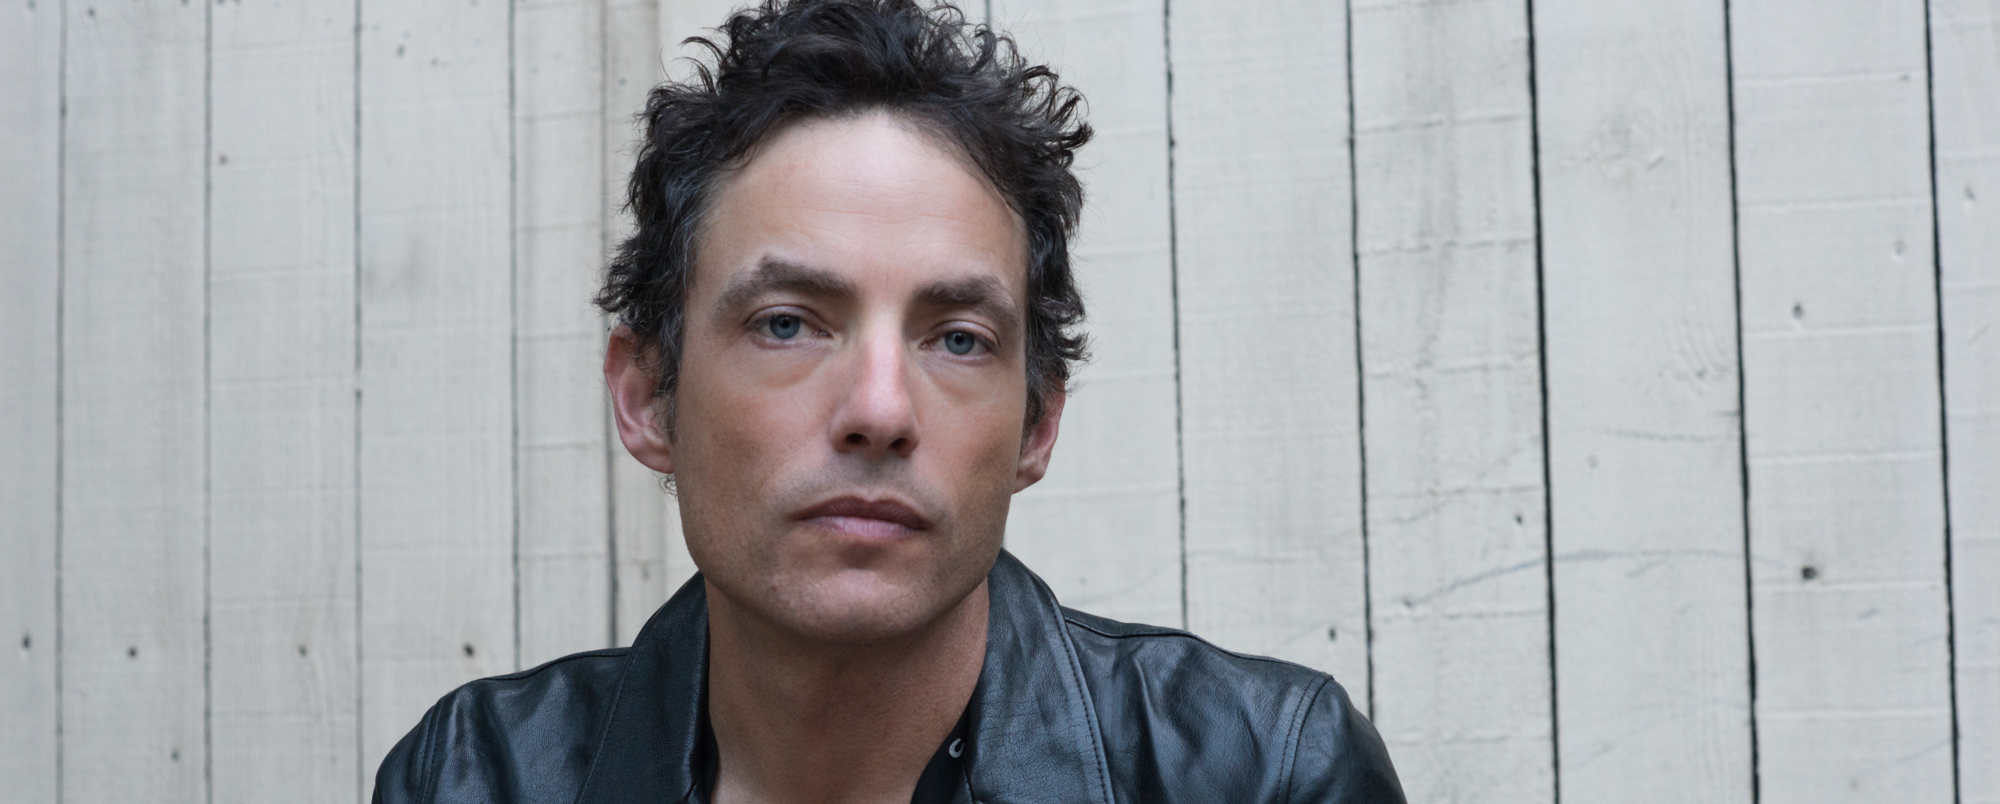 Review: The Wallflowers’ ‘Exit Wounds’ Makes an Indelible Impact